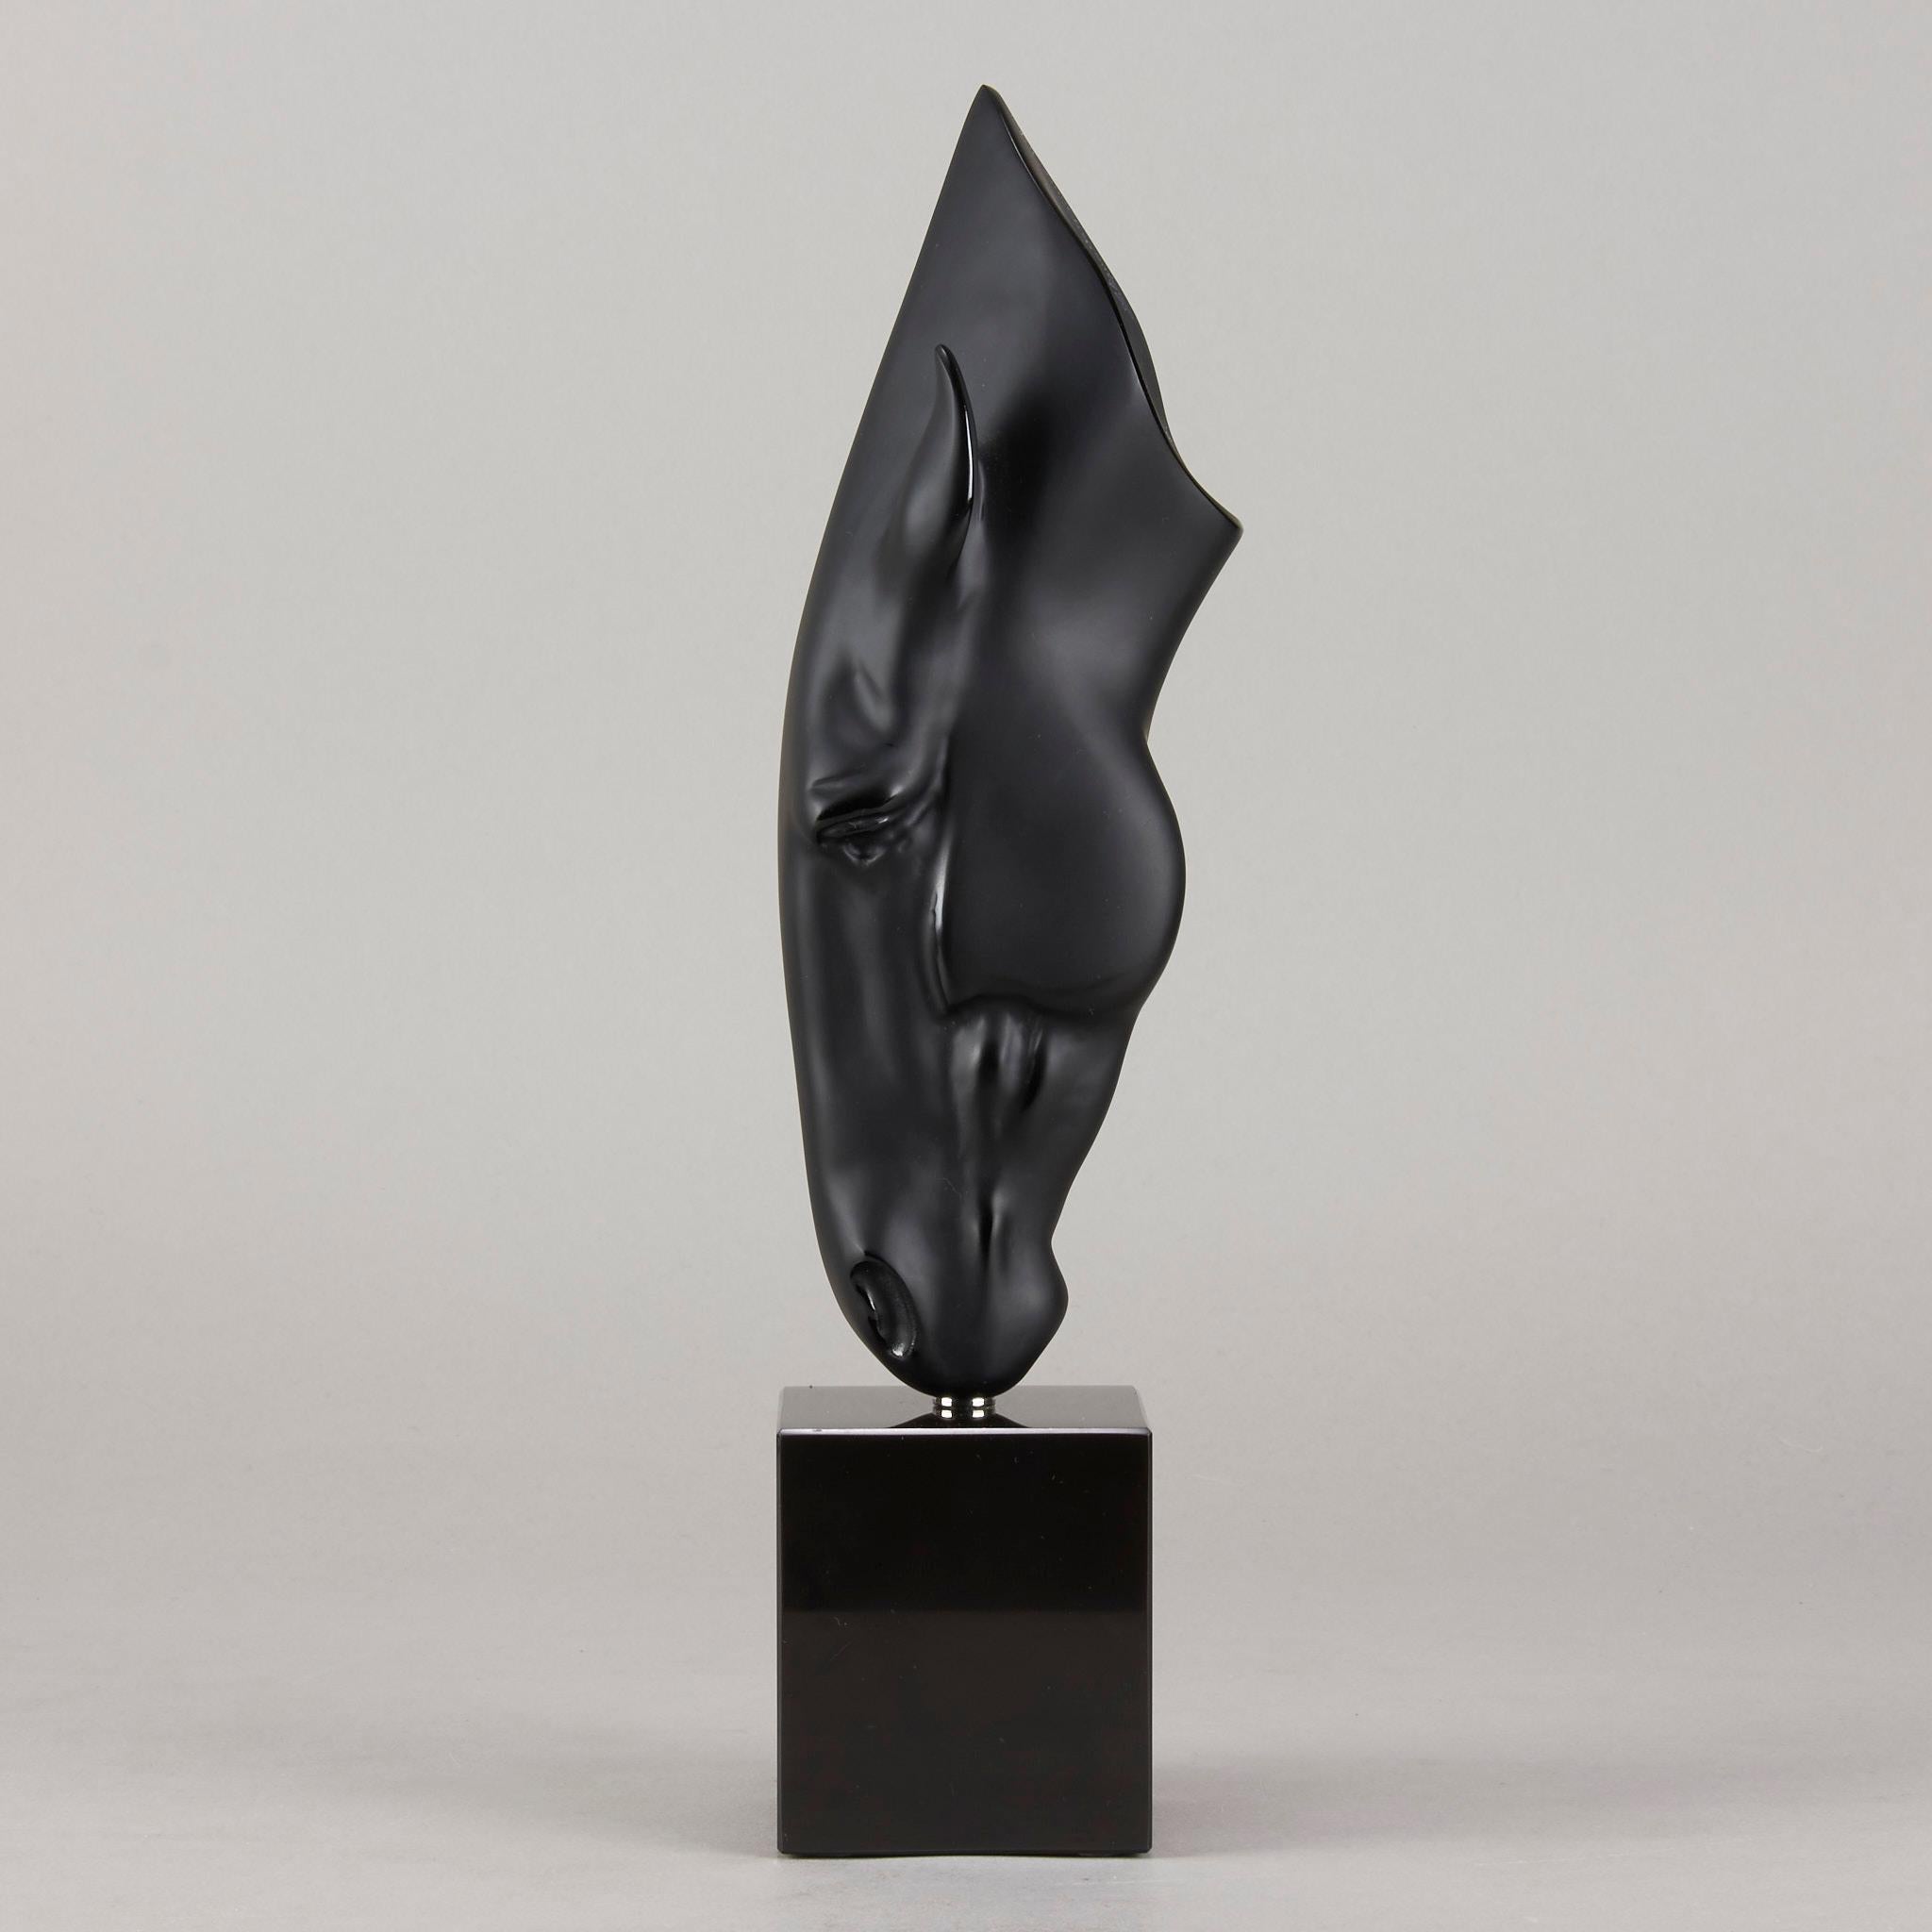 An outstanding deep black crytal glass study of a horse gently drinking from a water's surface, raised on a polished black glass plinth, signed Lalique France and numbered from the limited edition 40/250.
Lalique has produced the first